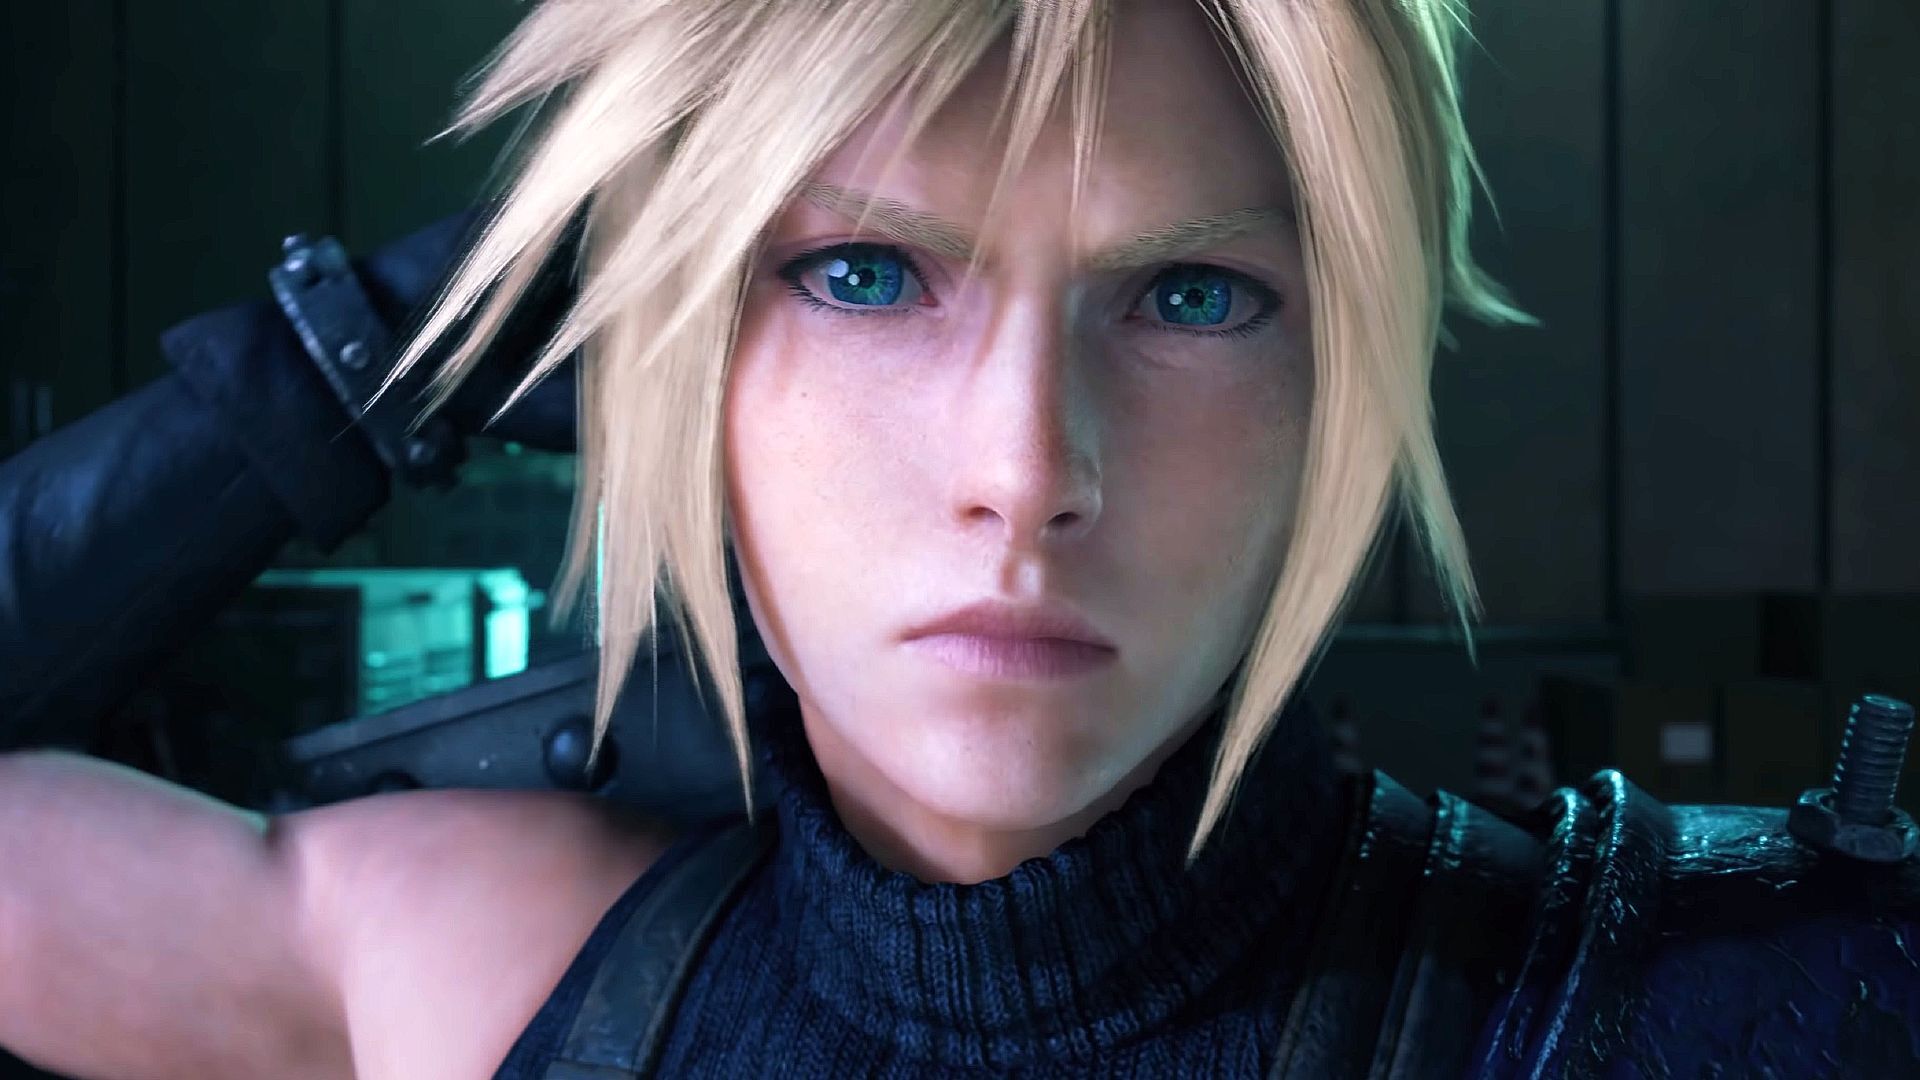 FF7 Rebirth story “axis” won't change from Final Fantasy VII